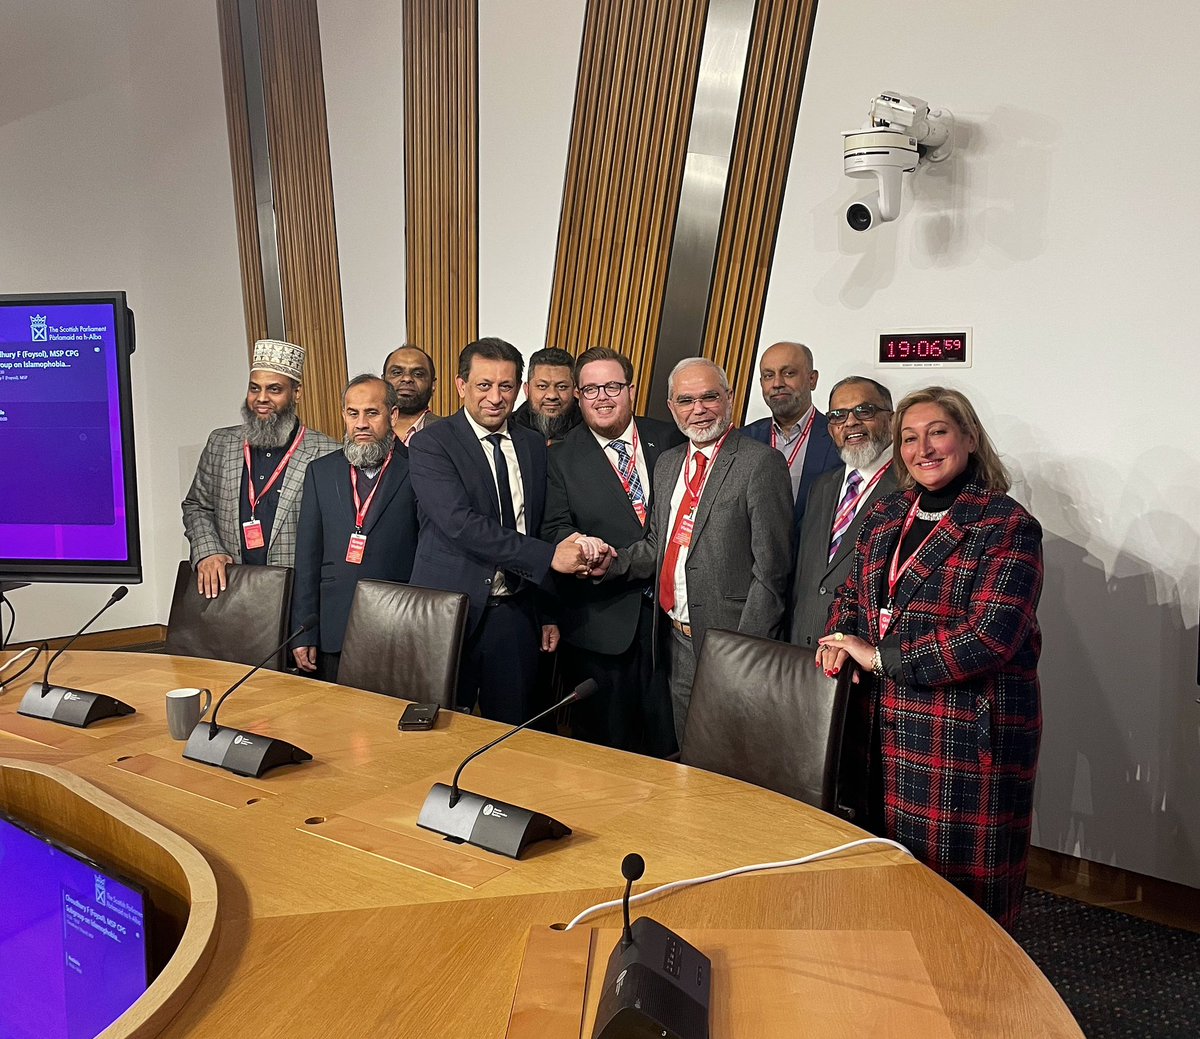 Good to launch CPG Tackling Racial & Religious Prejudice's Islamophobia sub-group. Inspiring discussion with community leaders on how to combat prejudice. Grateful for the group's commitment to tackle Islamophobia & hopeful for more sub-groups to tackle prejudices in Scotland.